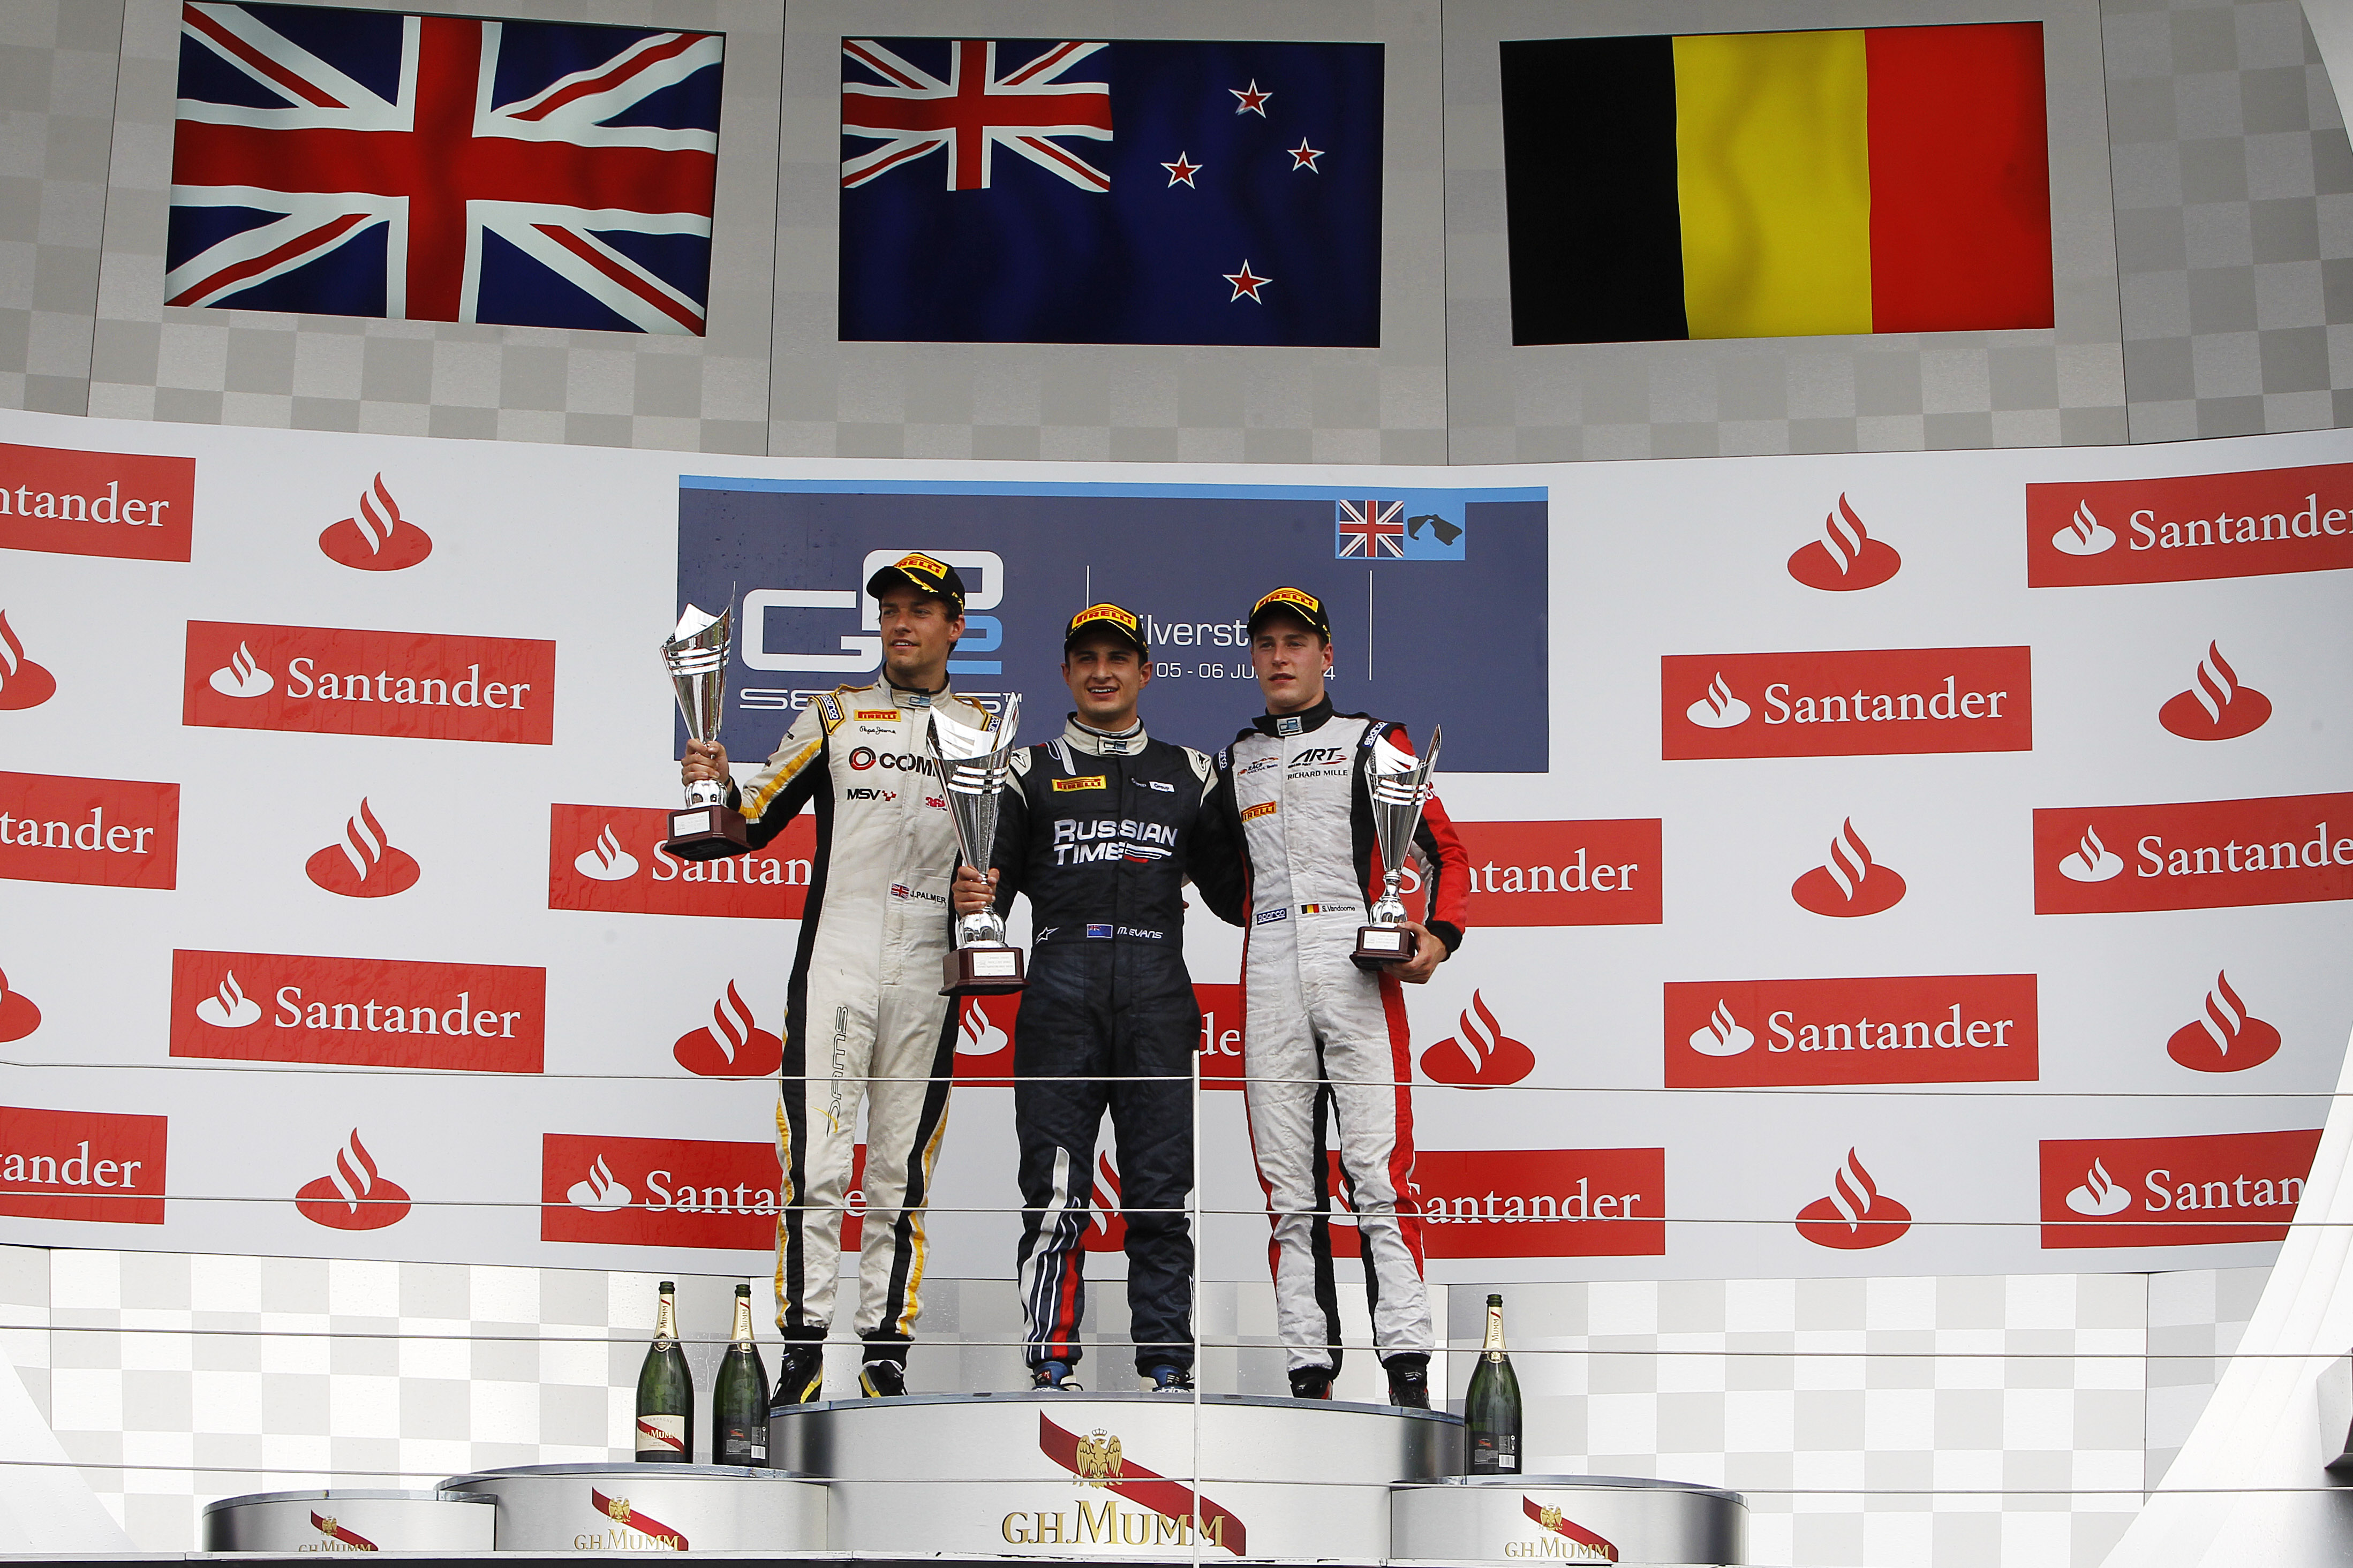 Evans comes of age with Silverstone GP2 win